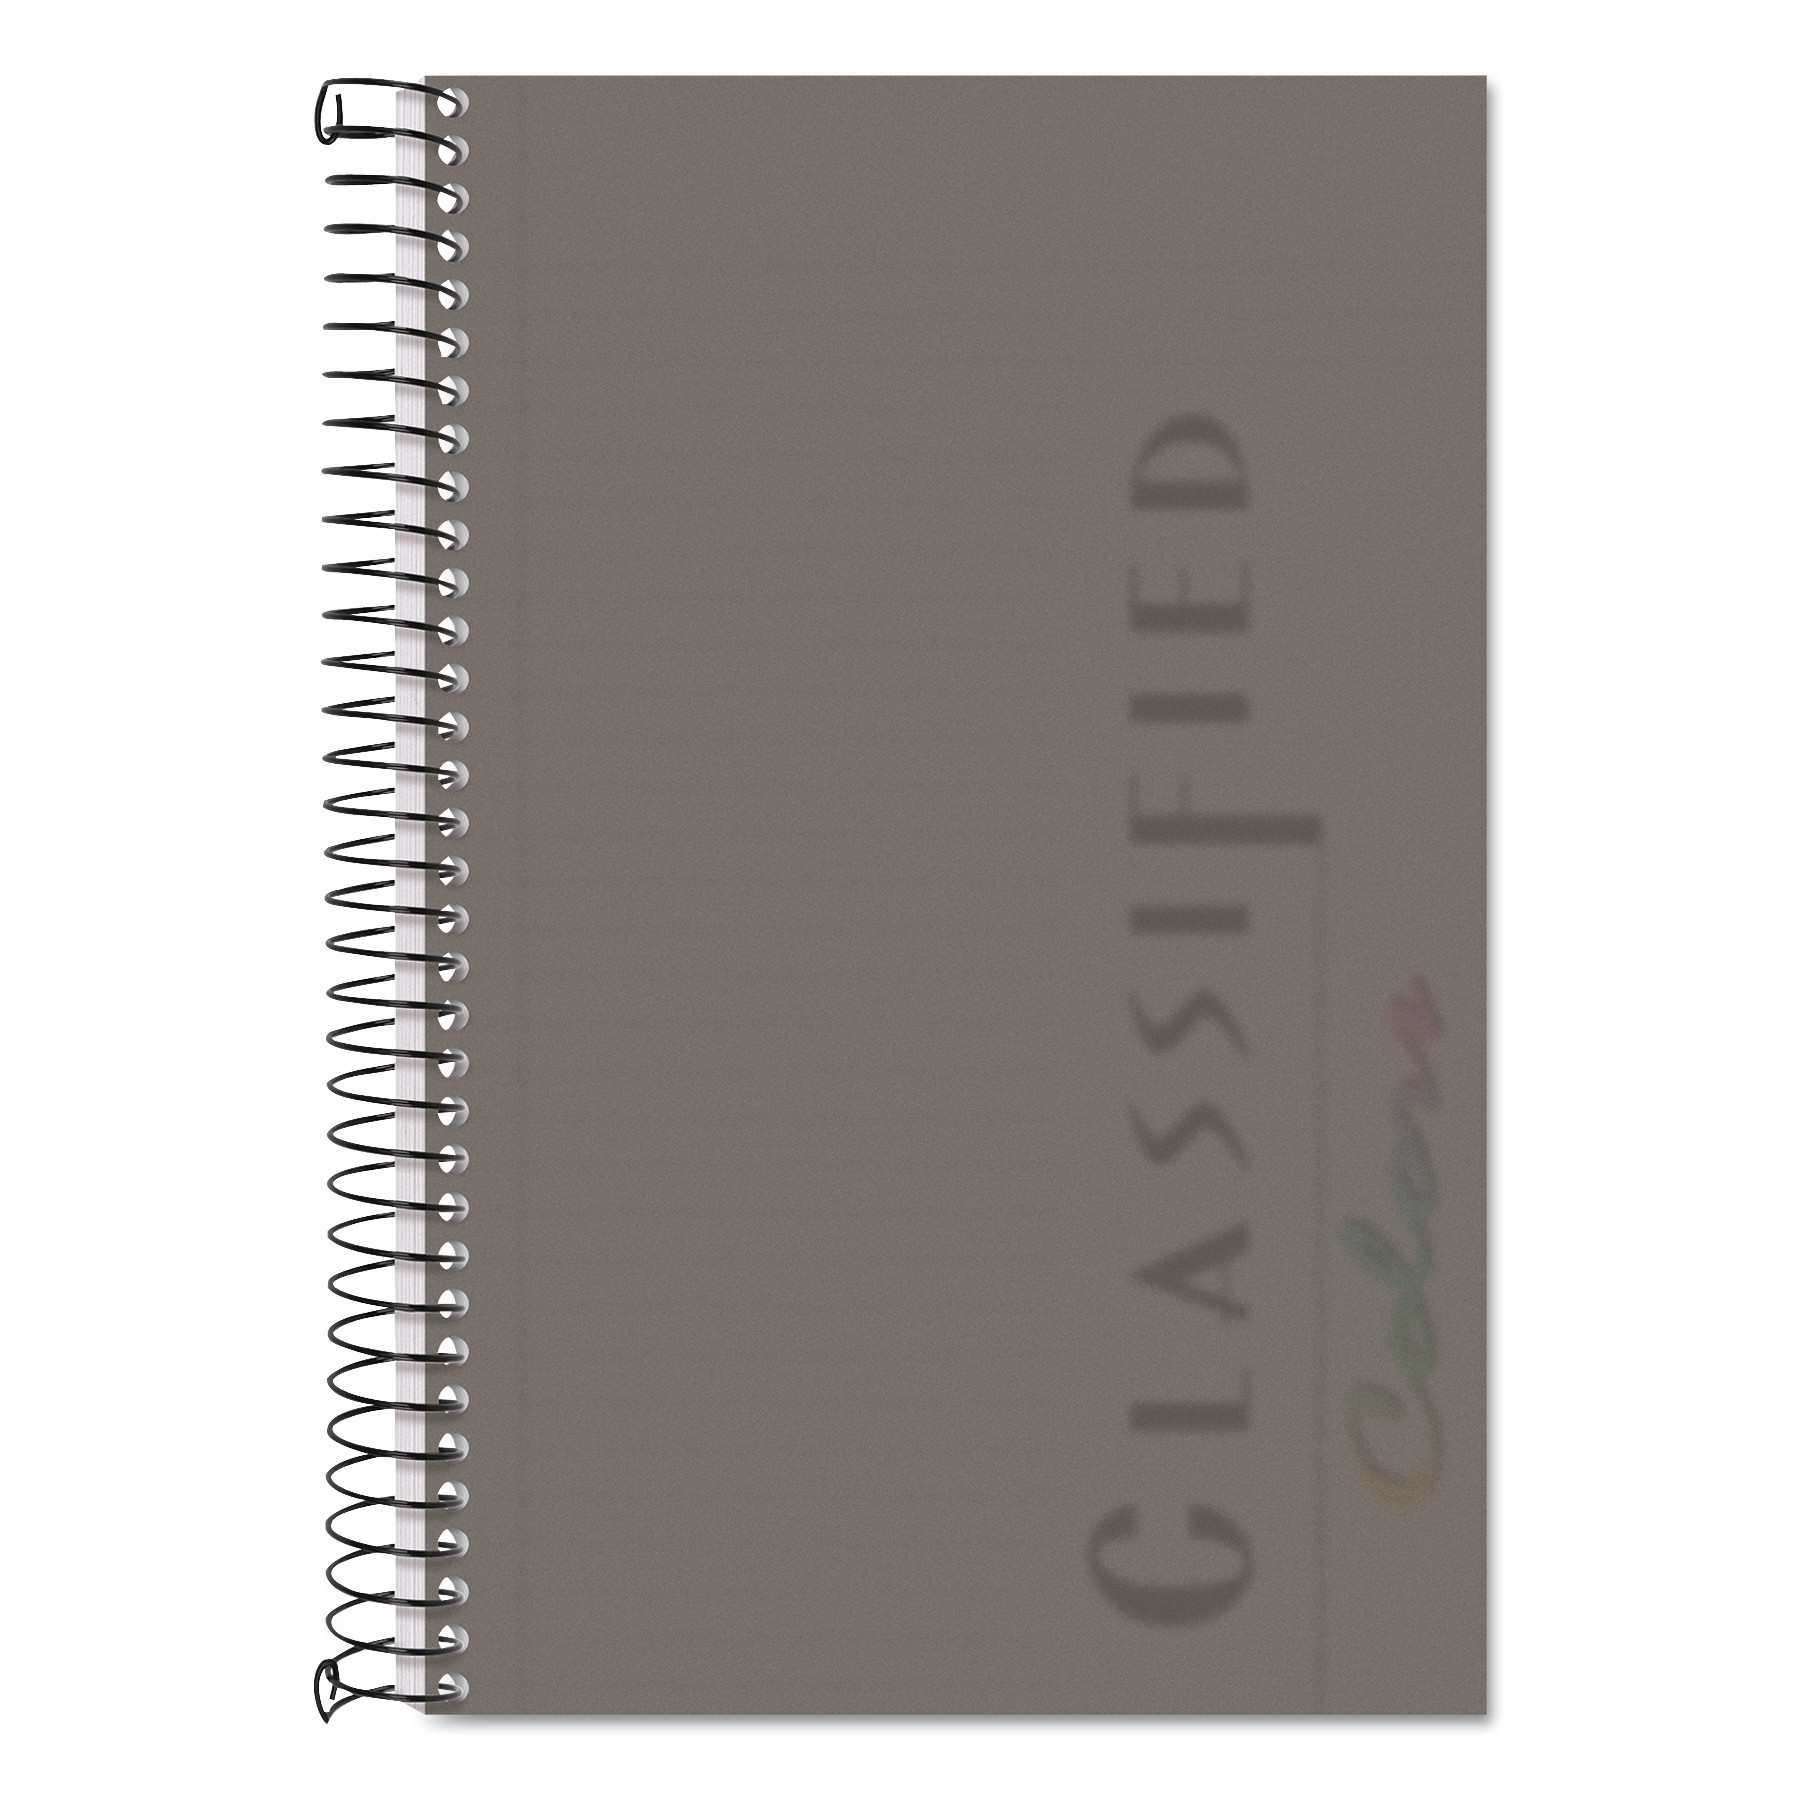  TOPS 73507 Color Notebooks, 1 Subject, Narrow Rule, Graphite Cover, 8.5 x 5.5, 100 Sheets (TOP73507) 